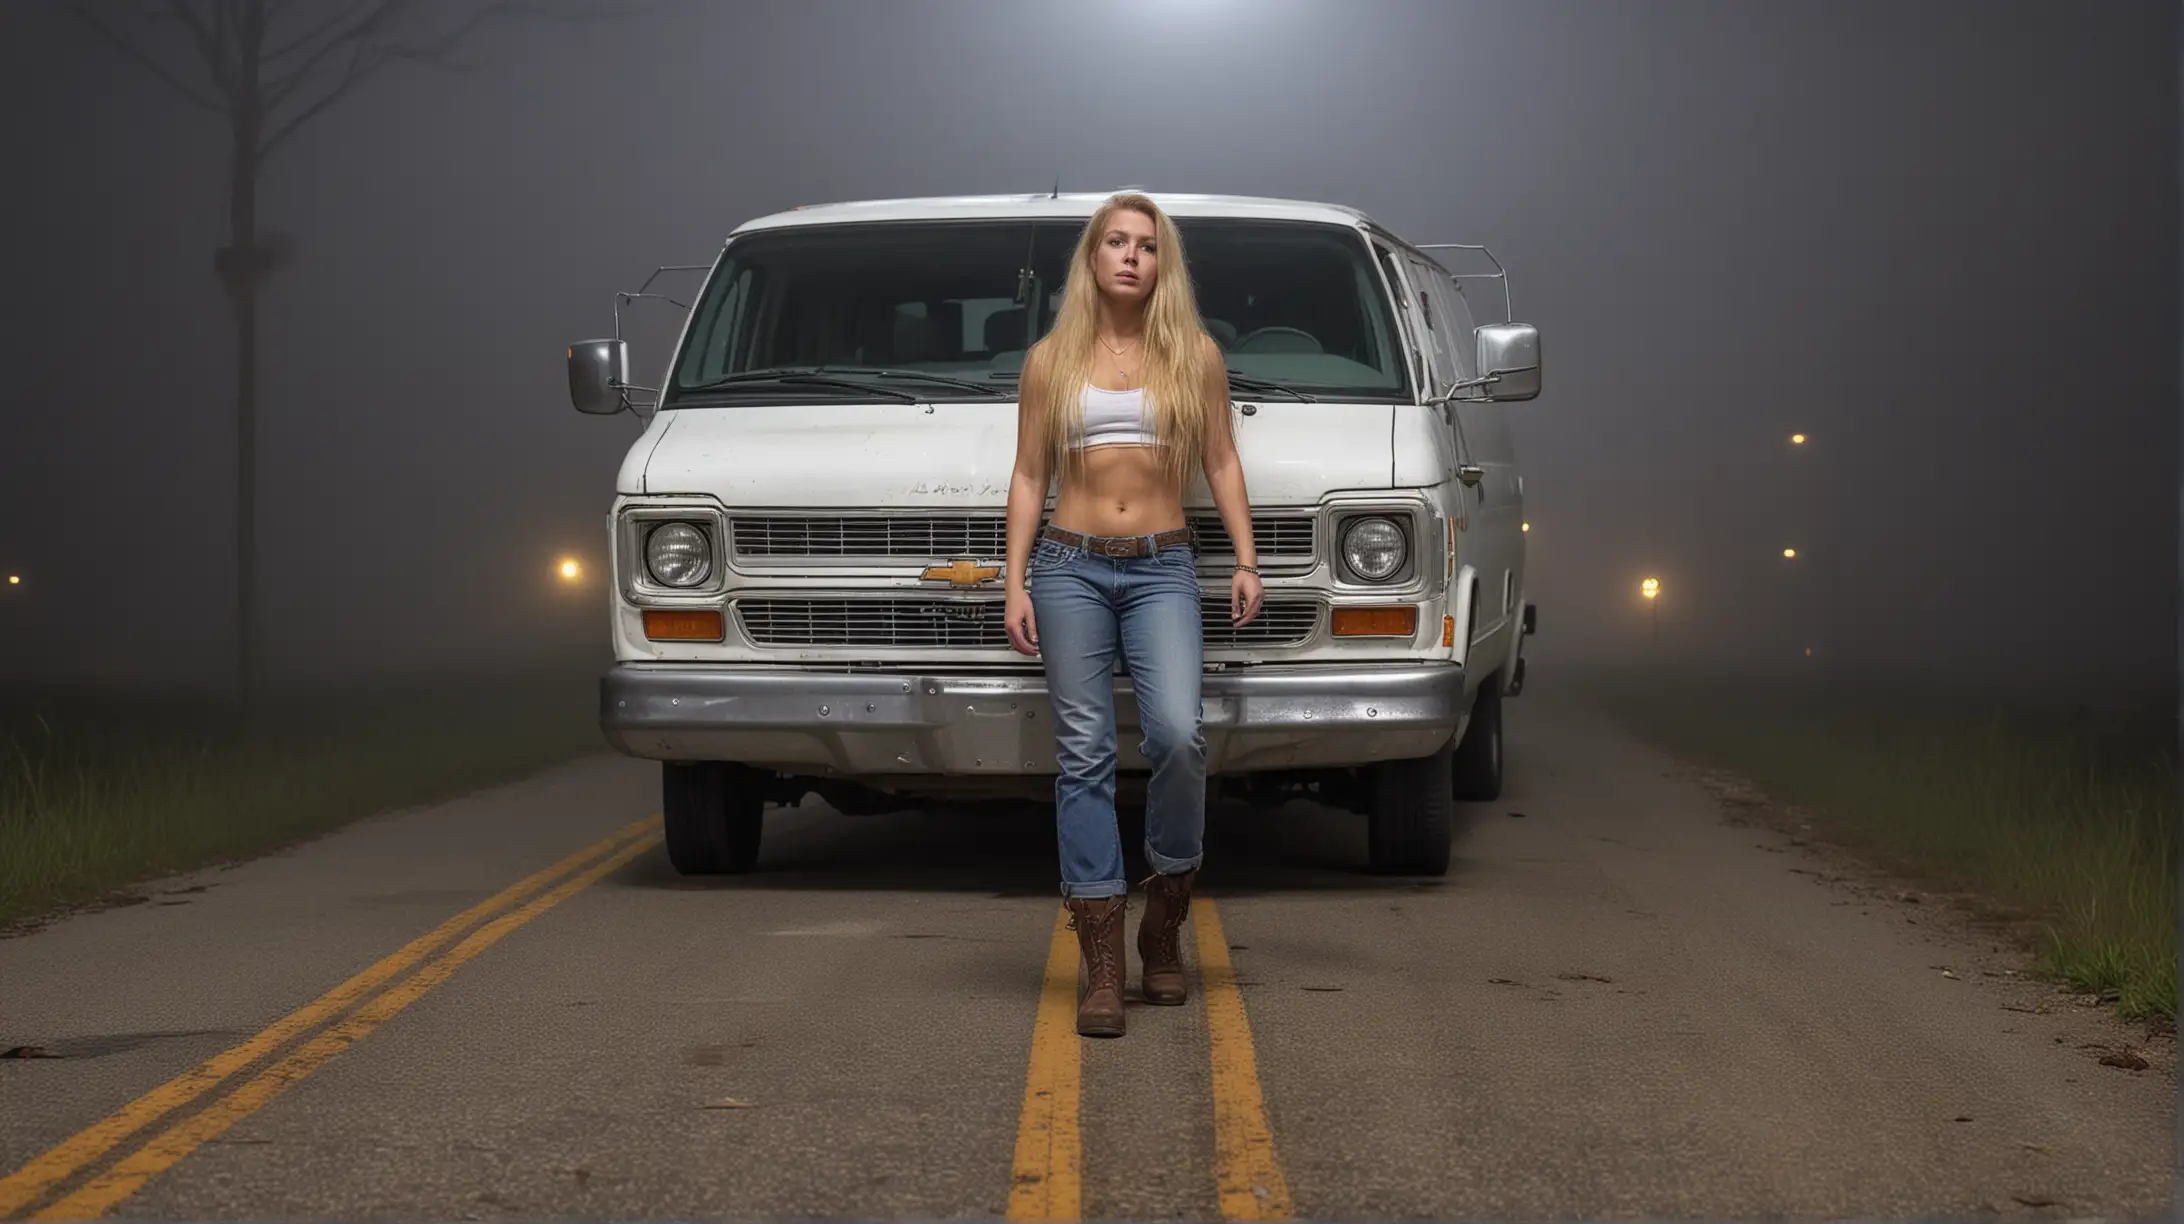 Blonde Redneck Woman by Old Chevy Van on Louisiana Road at Night